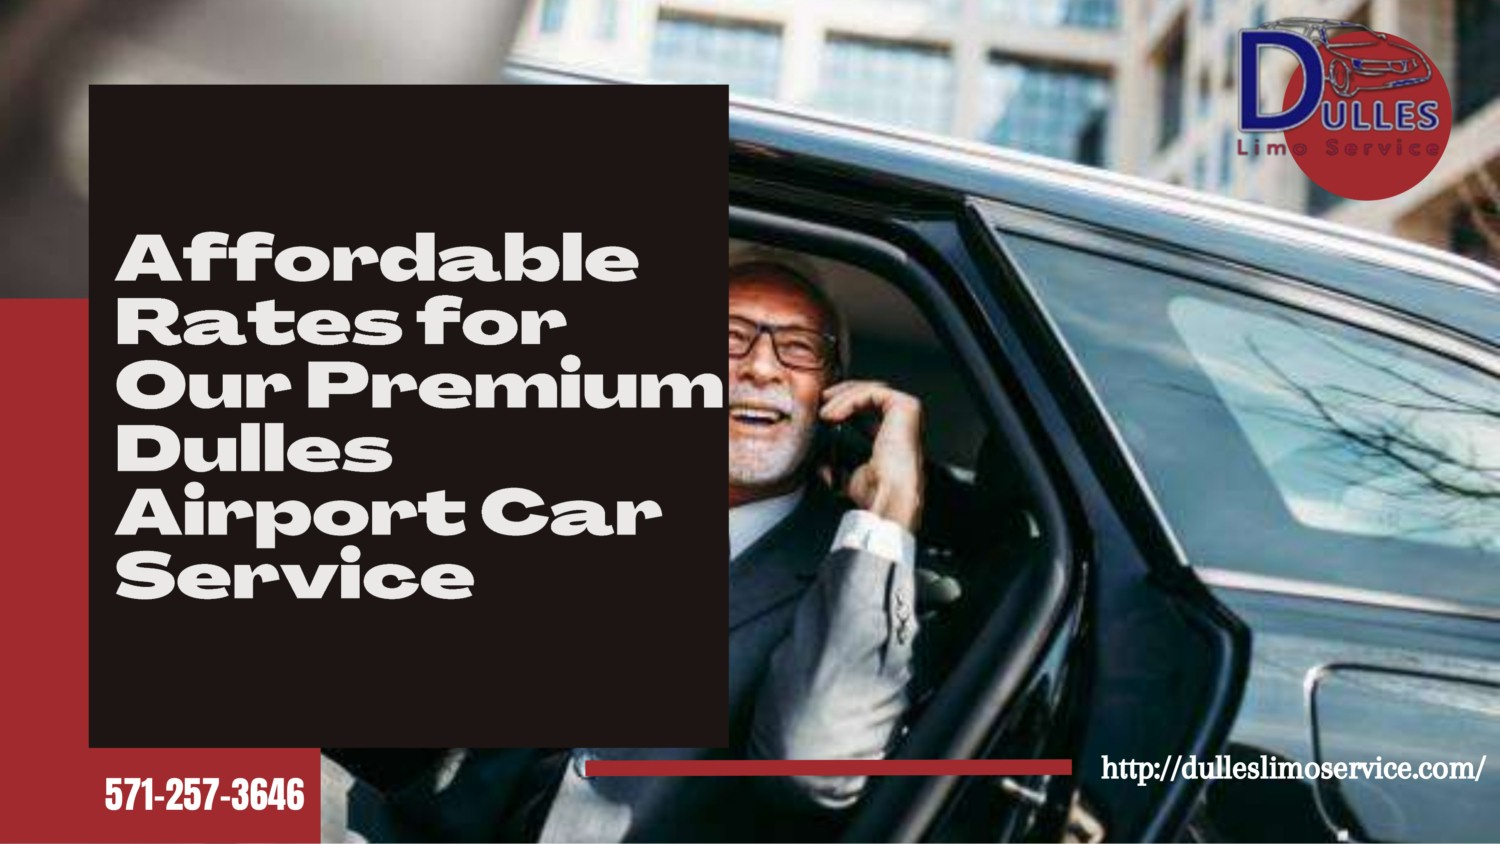 Affordable Rates for Our Premium Dulles Airport Car Service